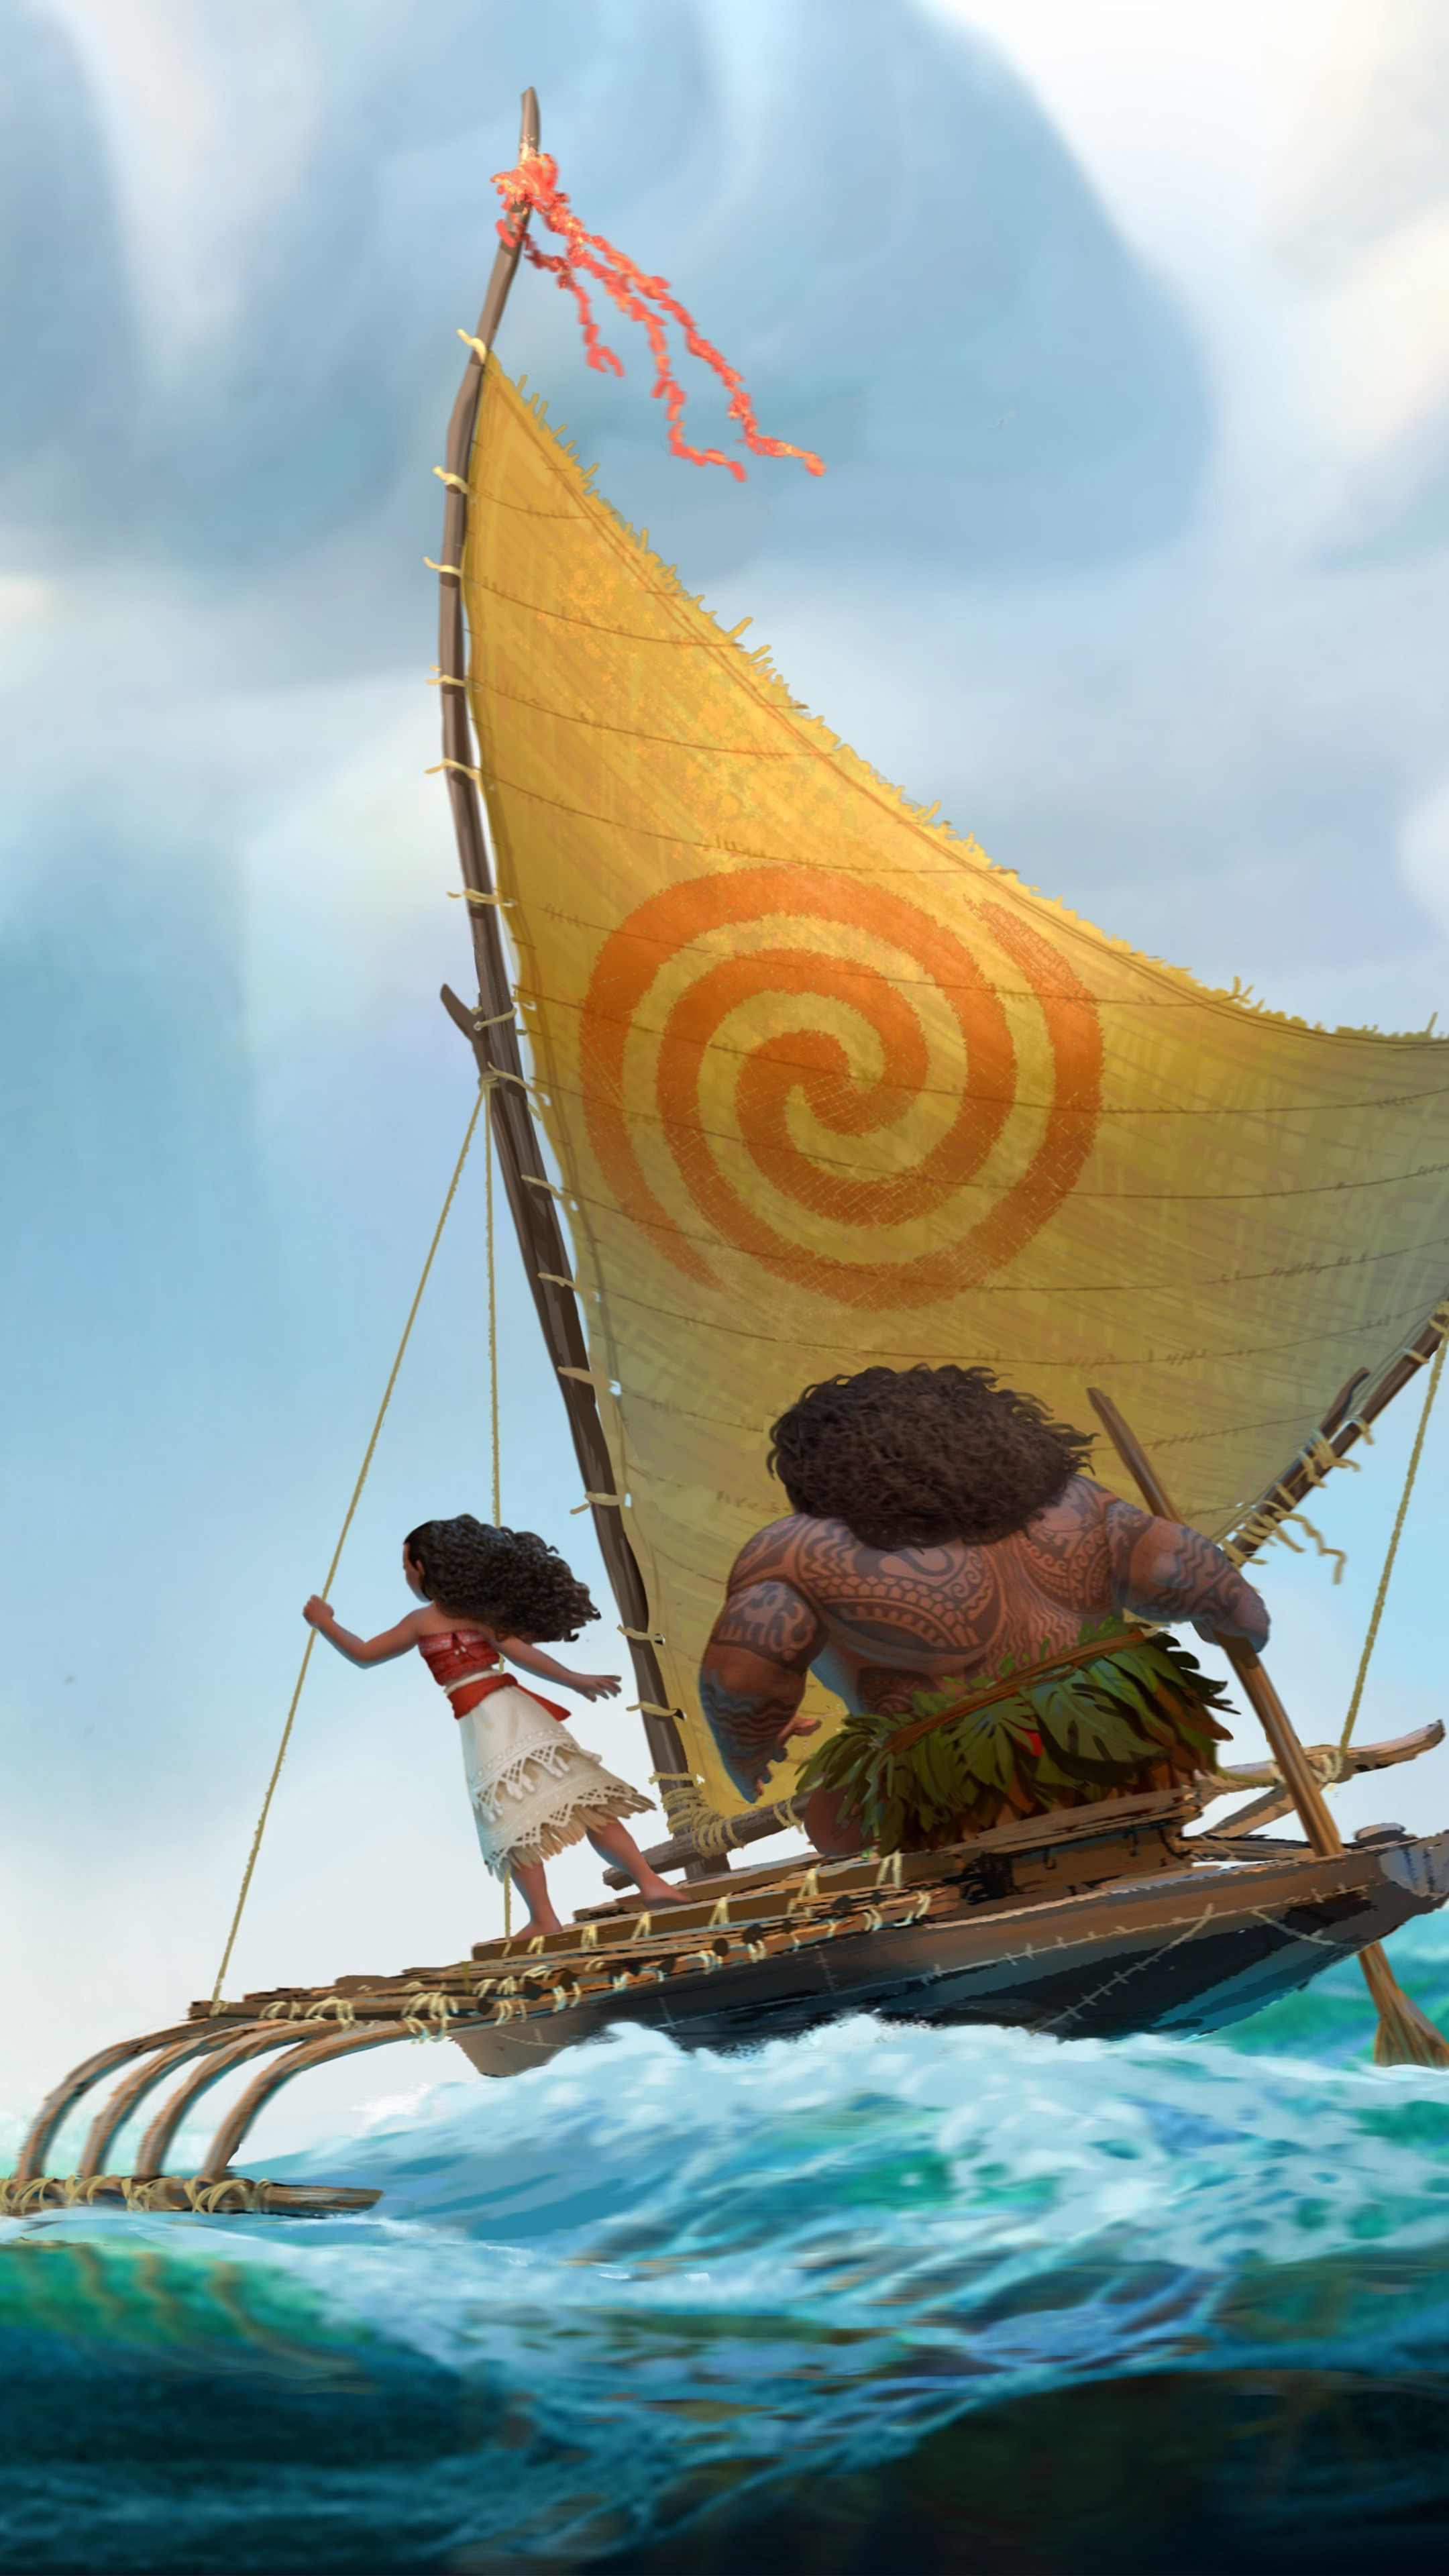 moana movie direct download